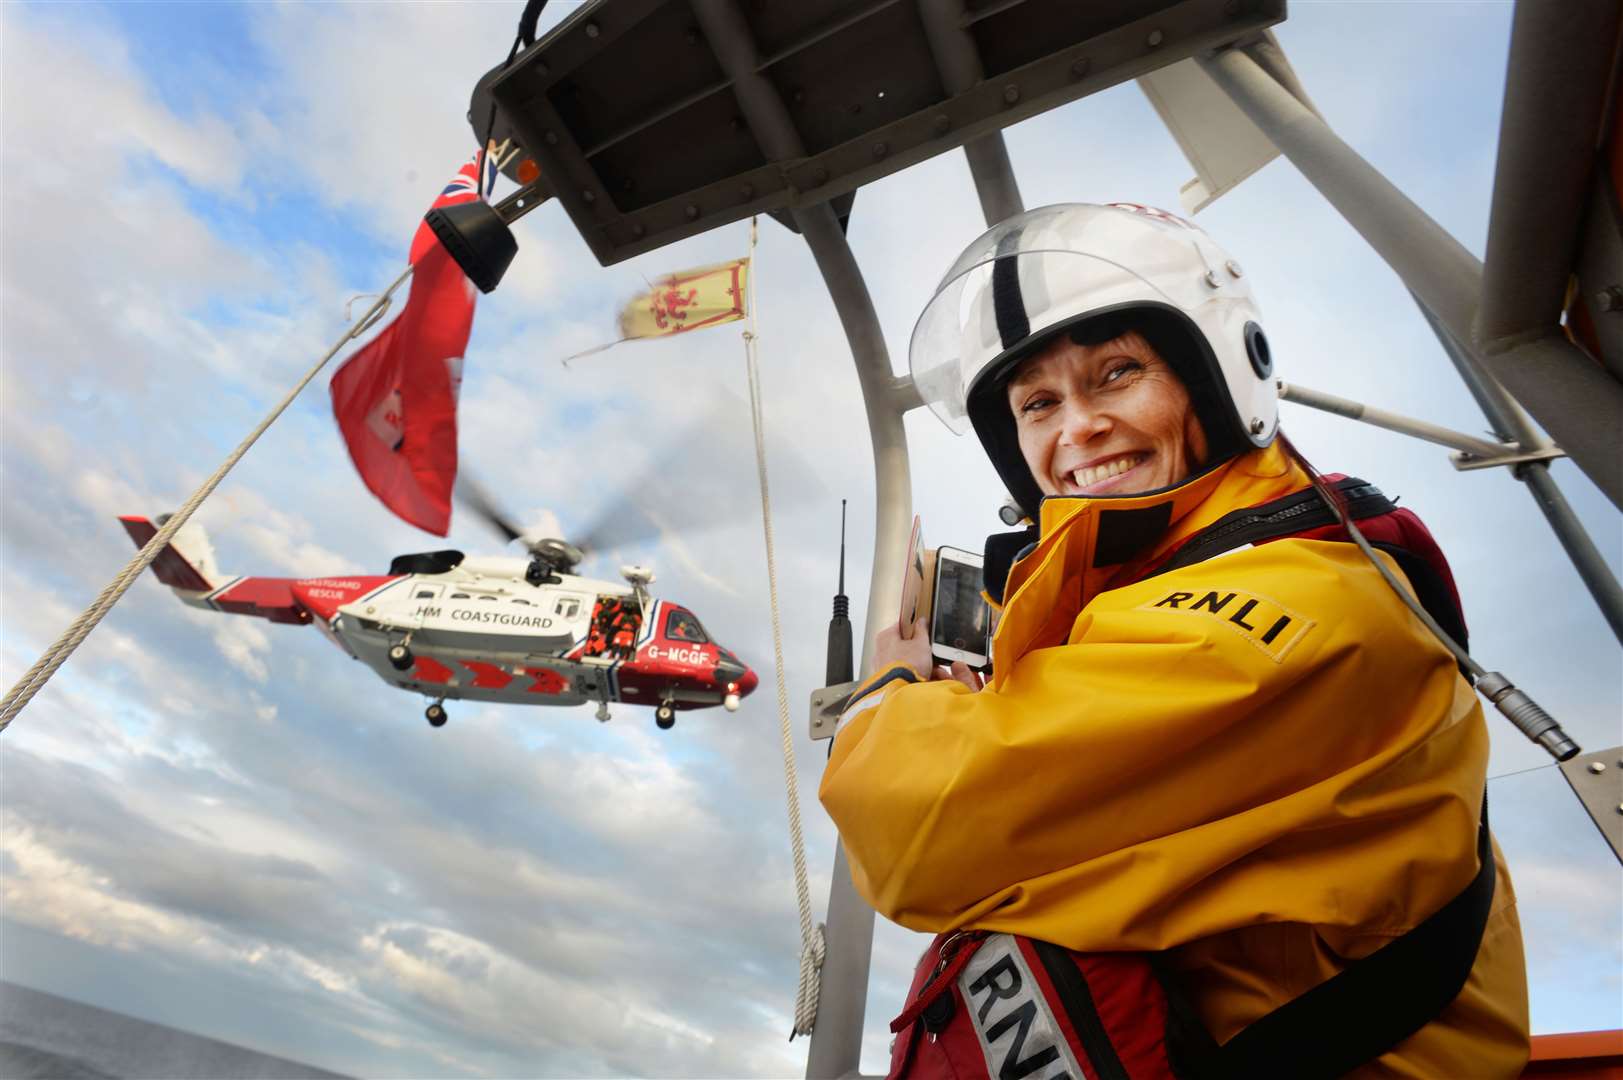 Nicky Marr's career as a magazine editor has seen her get involved with various groups in the community, including the RNLI. Picture: Gair Fraser